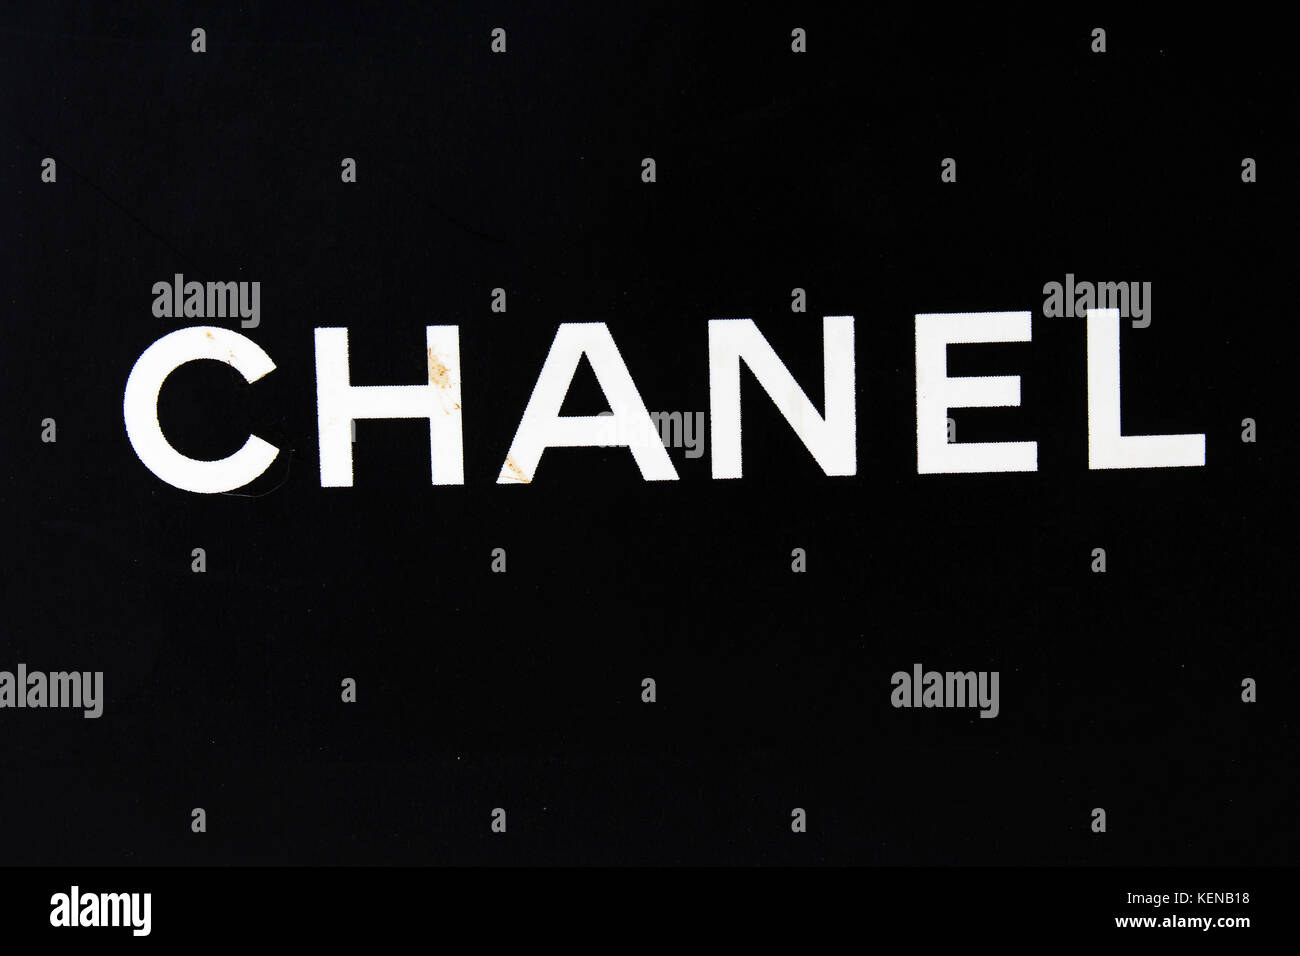 Chanel logo Black and White Stock Photos & Images - Alamy